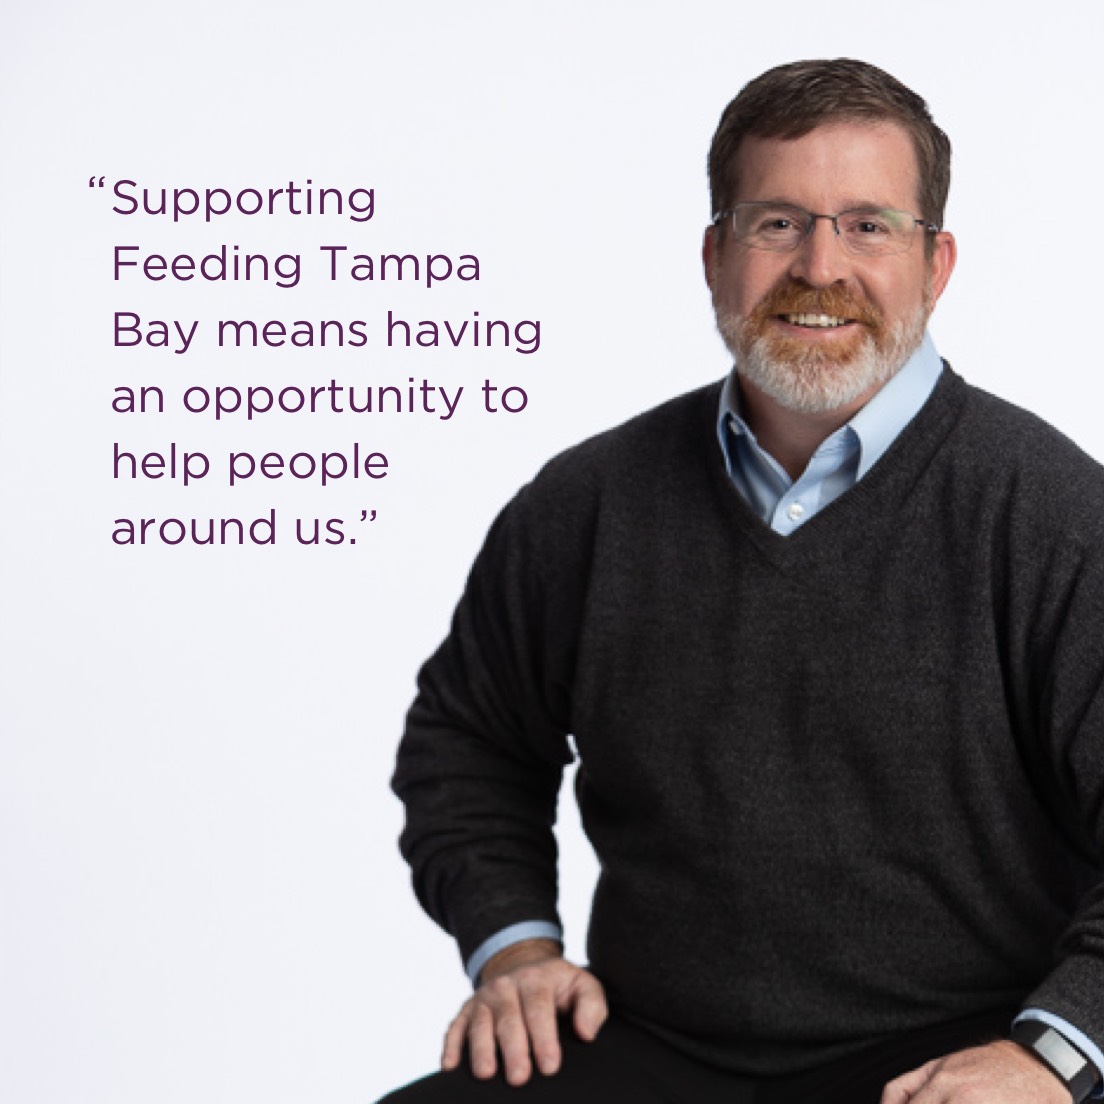 Matt Spence - "Supporting Feeding Tampa Bay means having an opportunity to help people around us.”